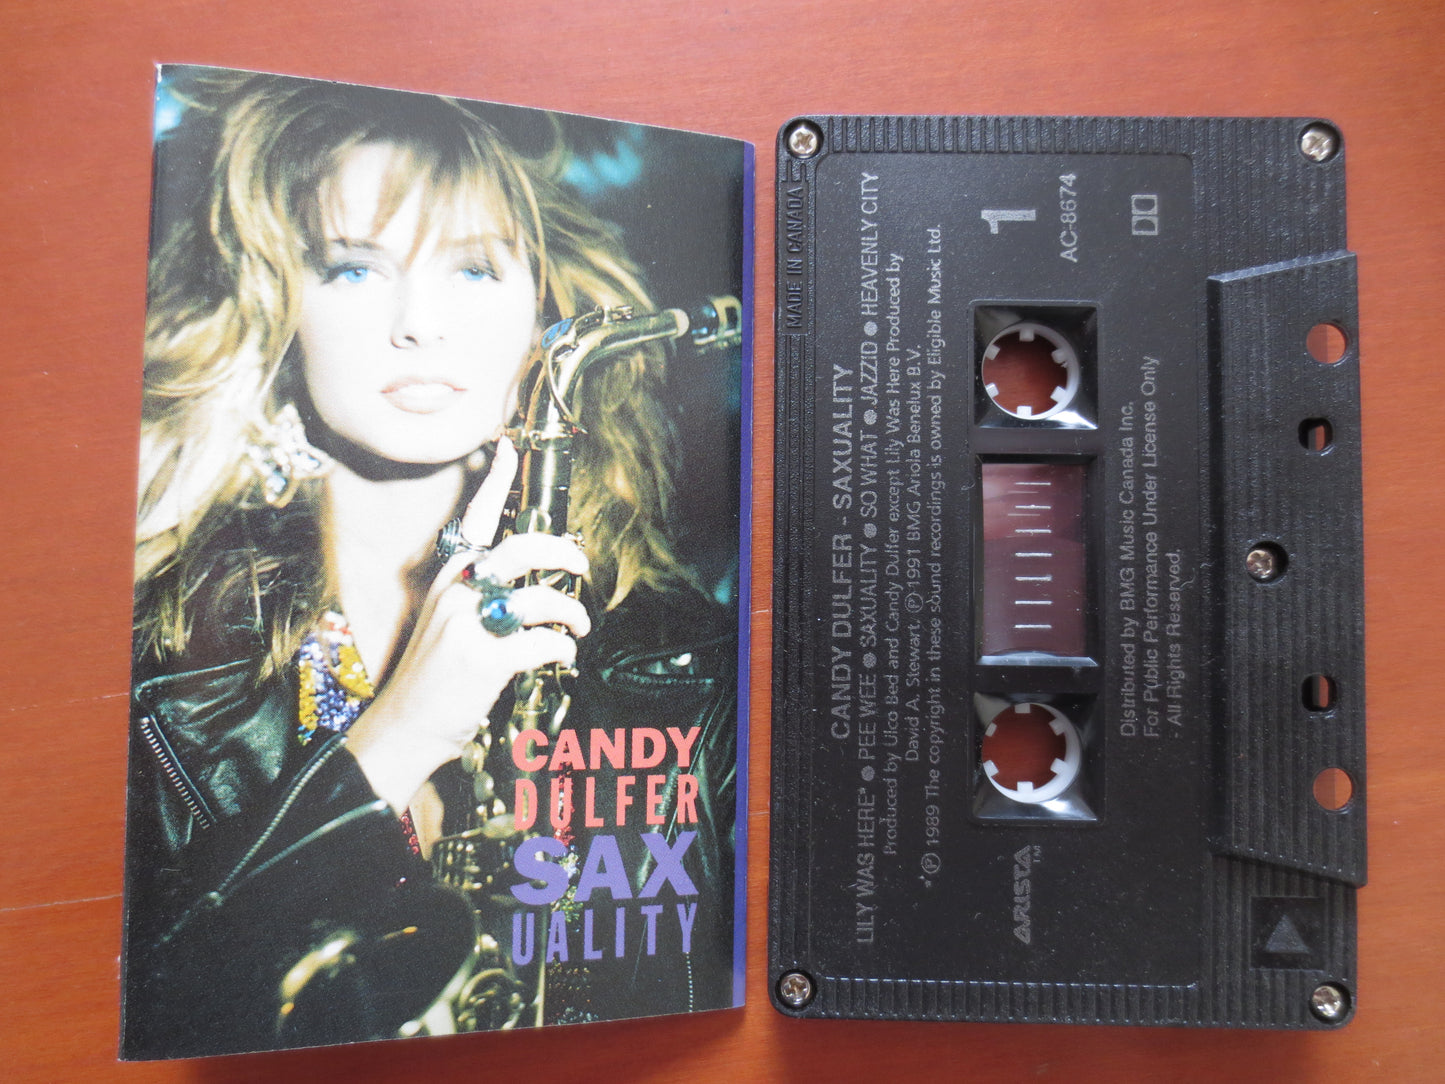 CANDY DULFER, SAXUALITY, Candy Dulfer Lp, Tape Cassette, Jazz Cassette, Funk Cassette, Music Cassette, 1991 Cassette